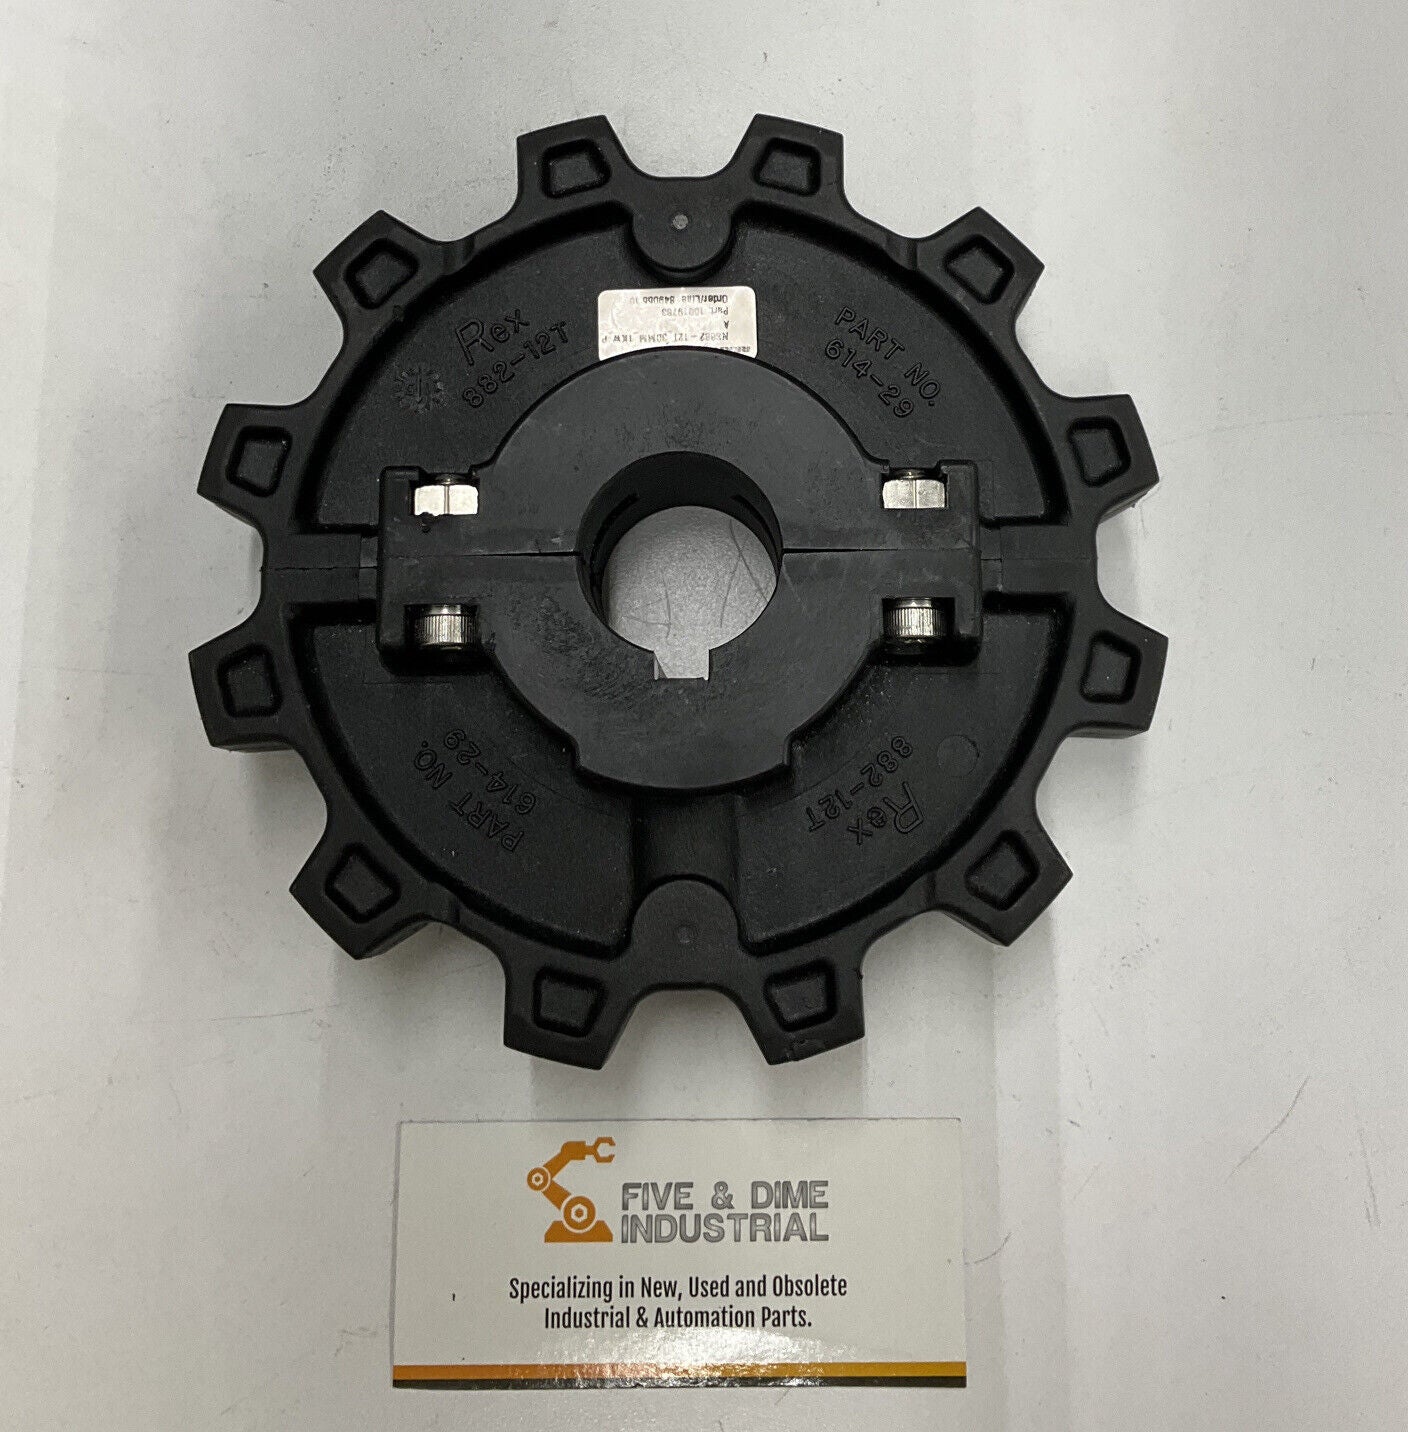 Rexnord 614-29 / 882-12T 2 Piece Sprocket 30mm Bore (CL351)